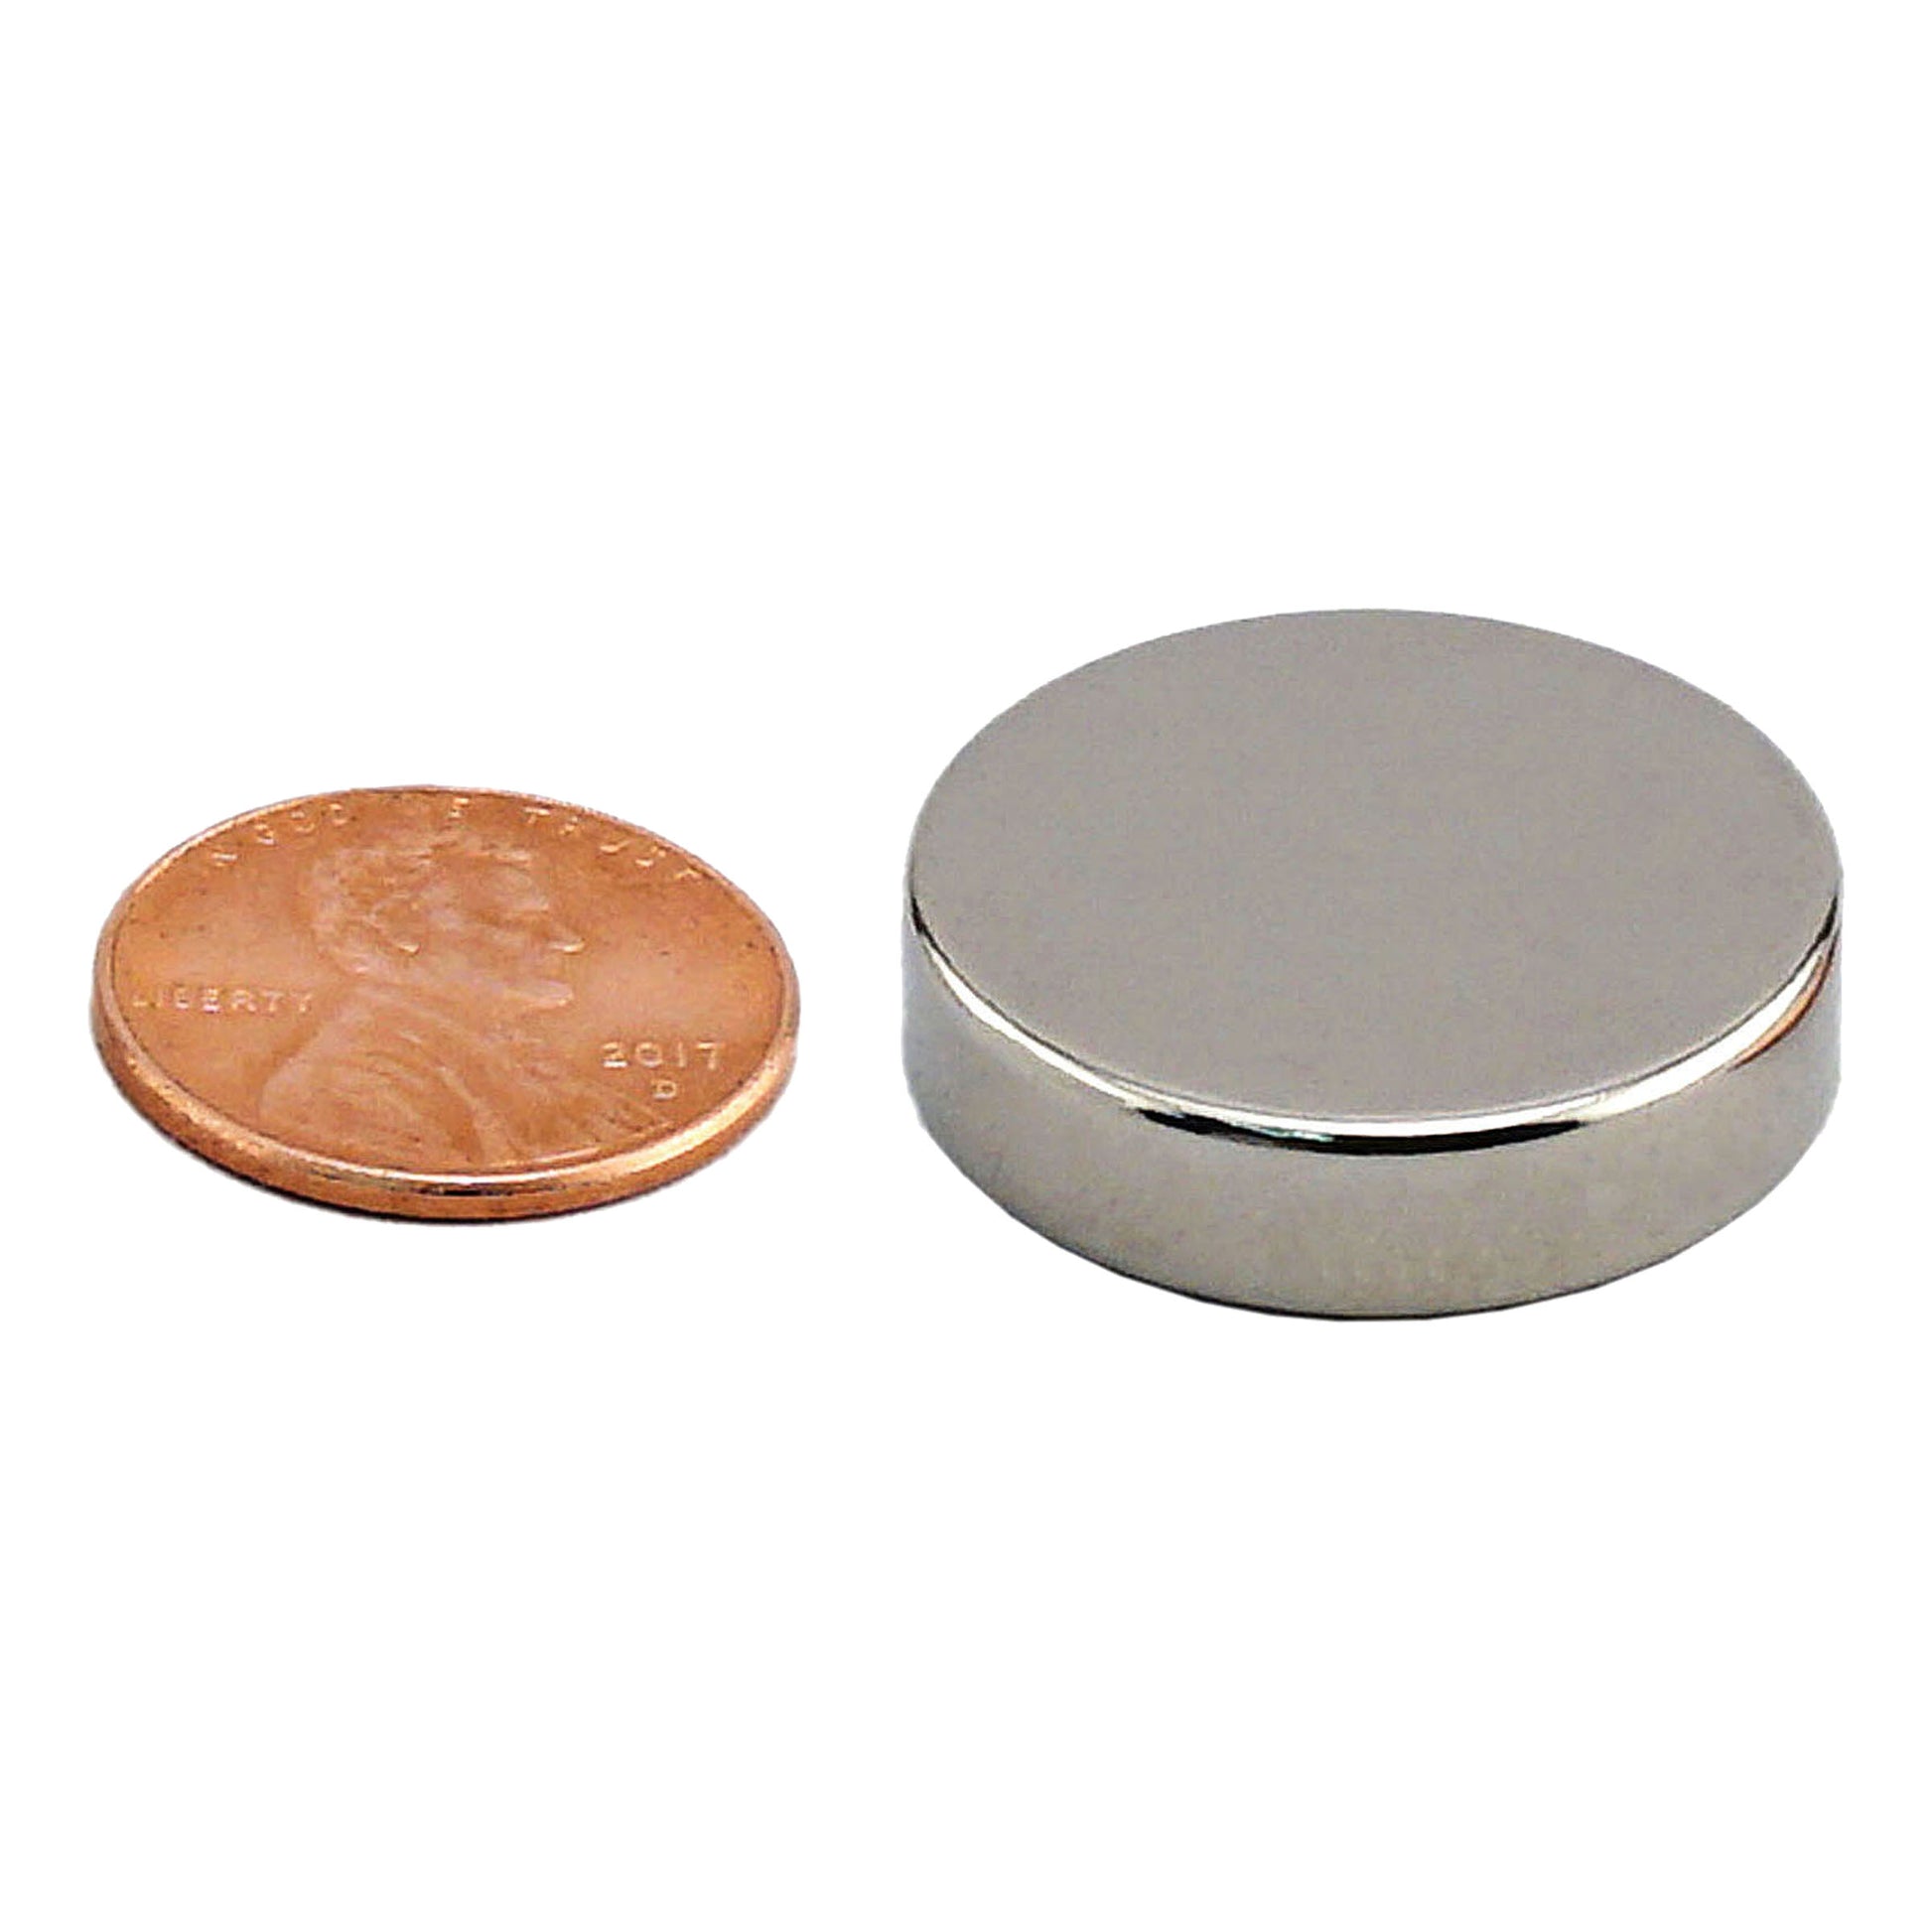 Load image into Gallery viewer, ND45-1X25N Neodymium Disc Magnet - Compared to Penny for Size Reference